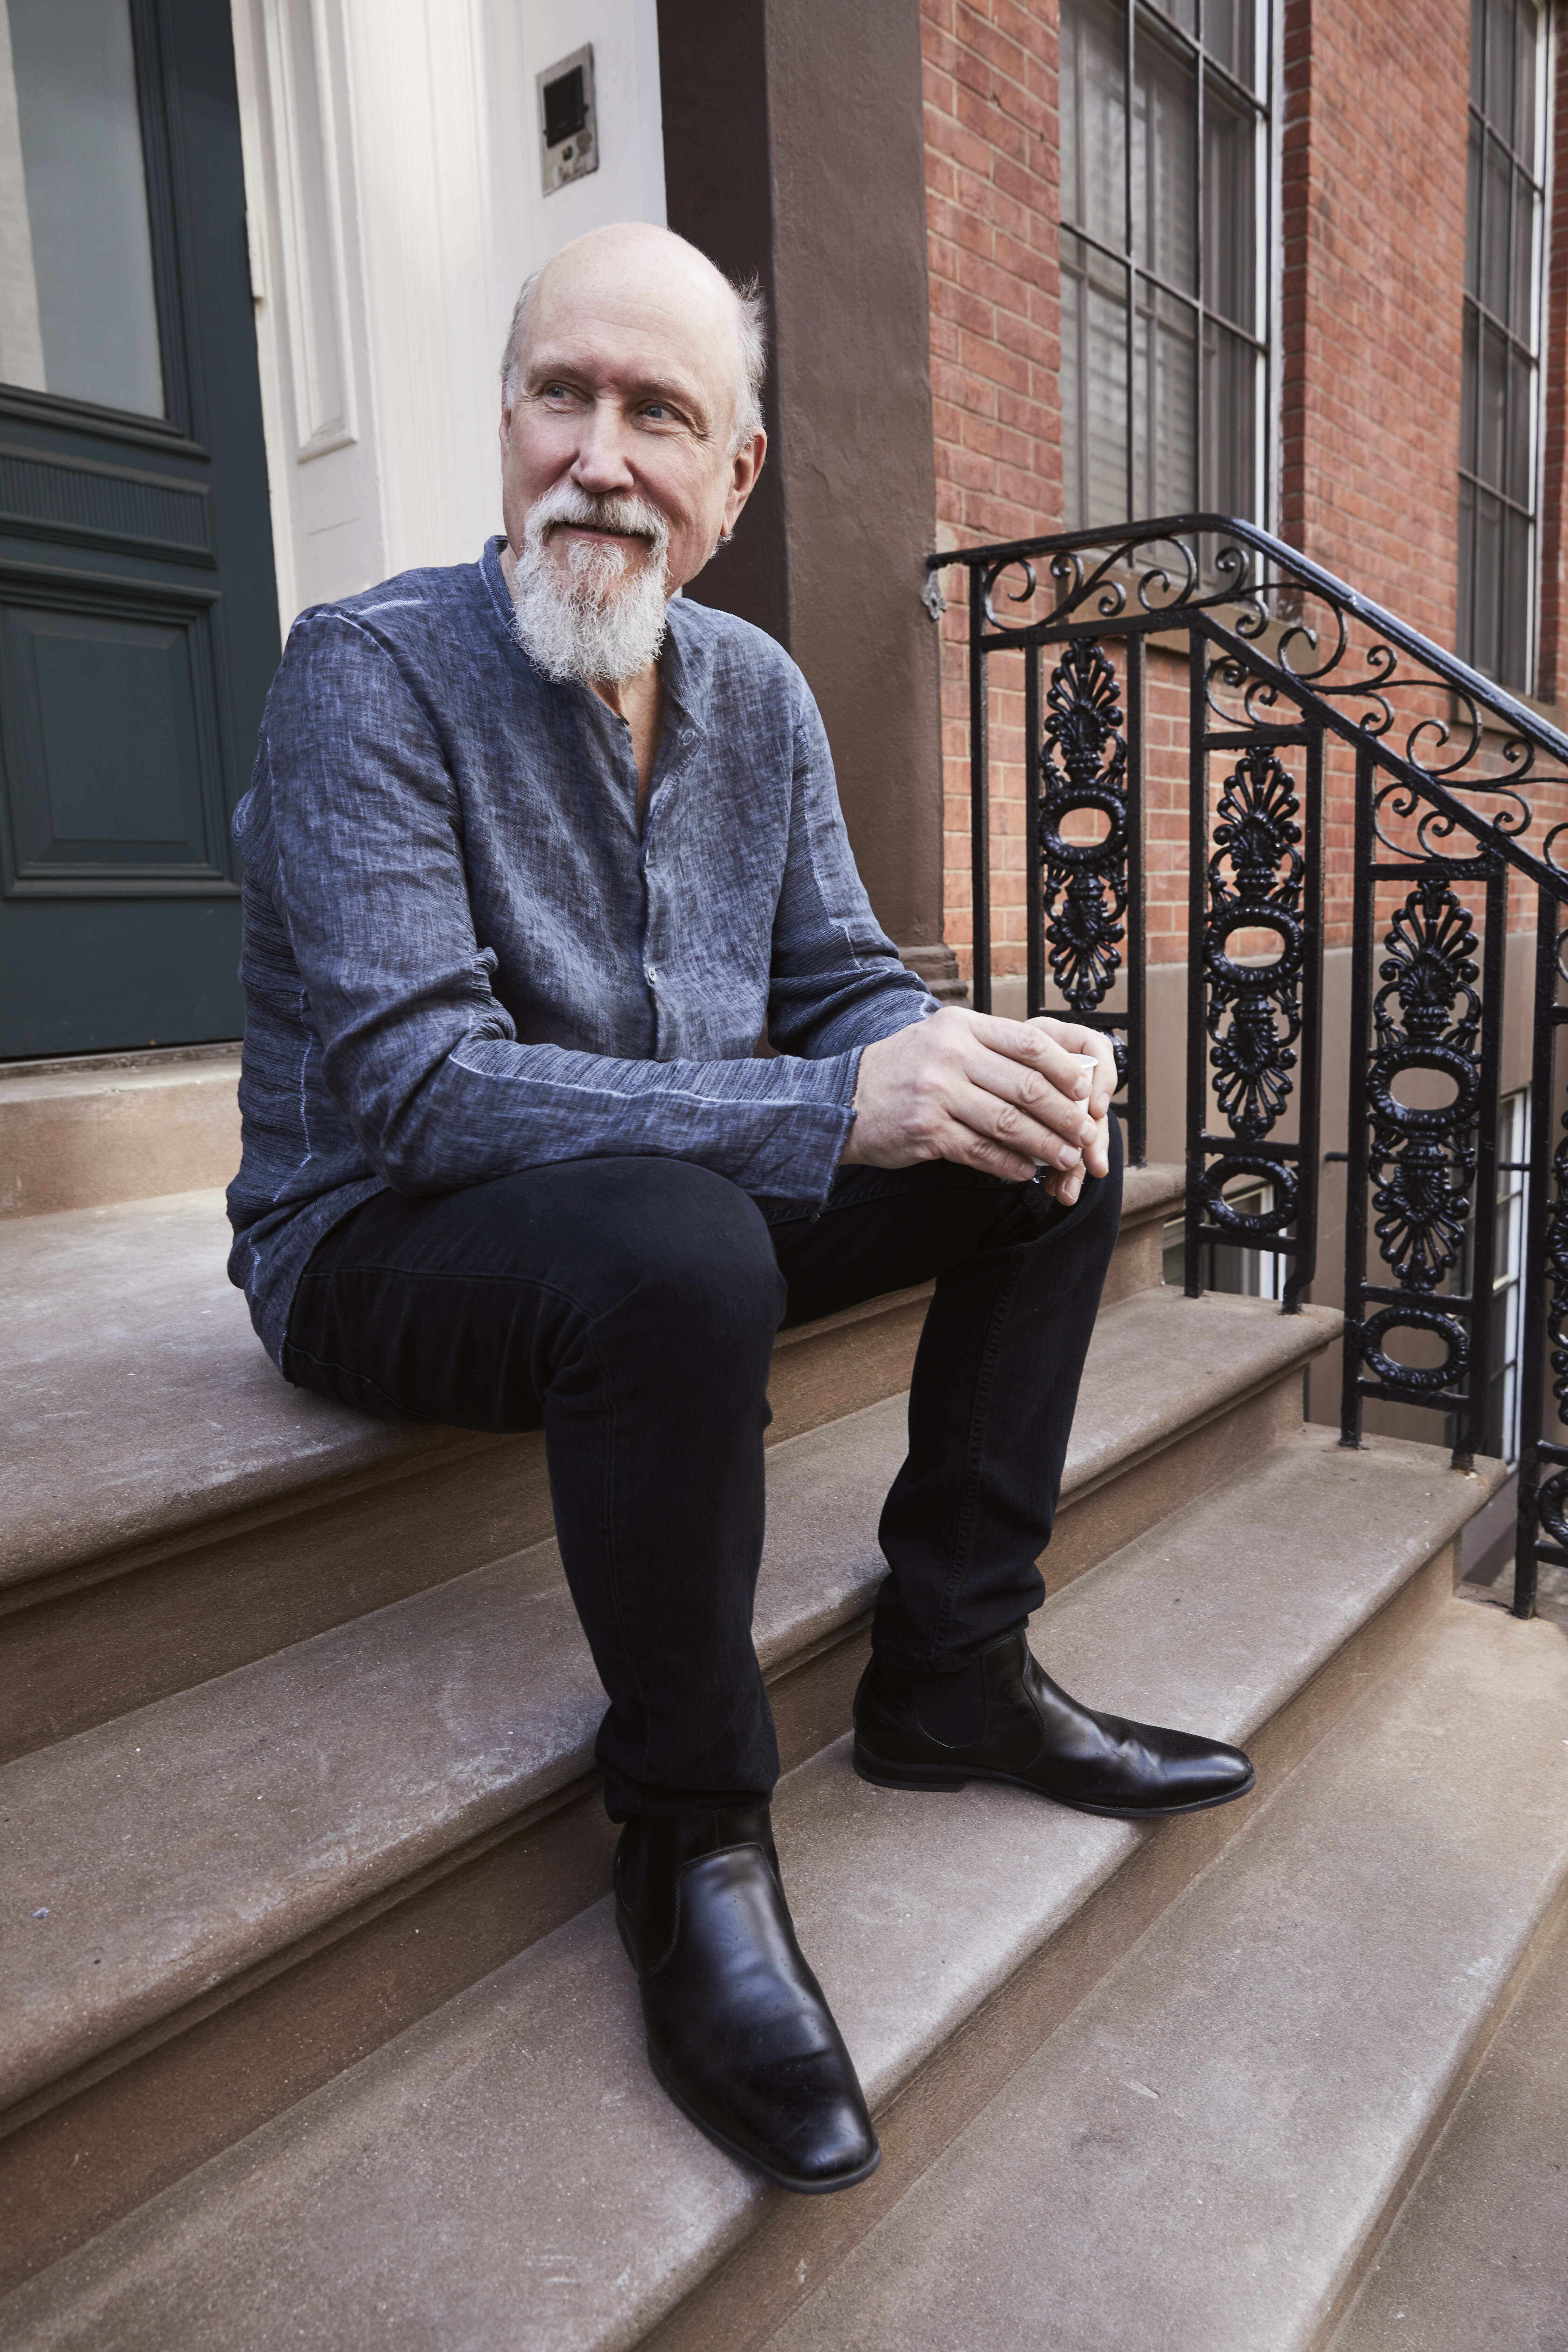 Guitarist and composer John Scofield. NICK SUTTLE